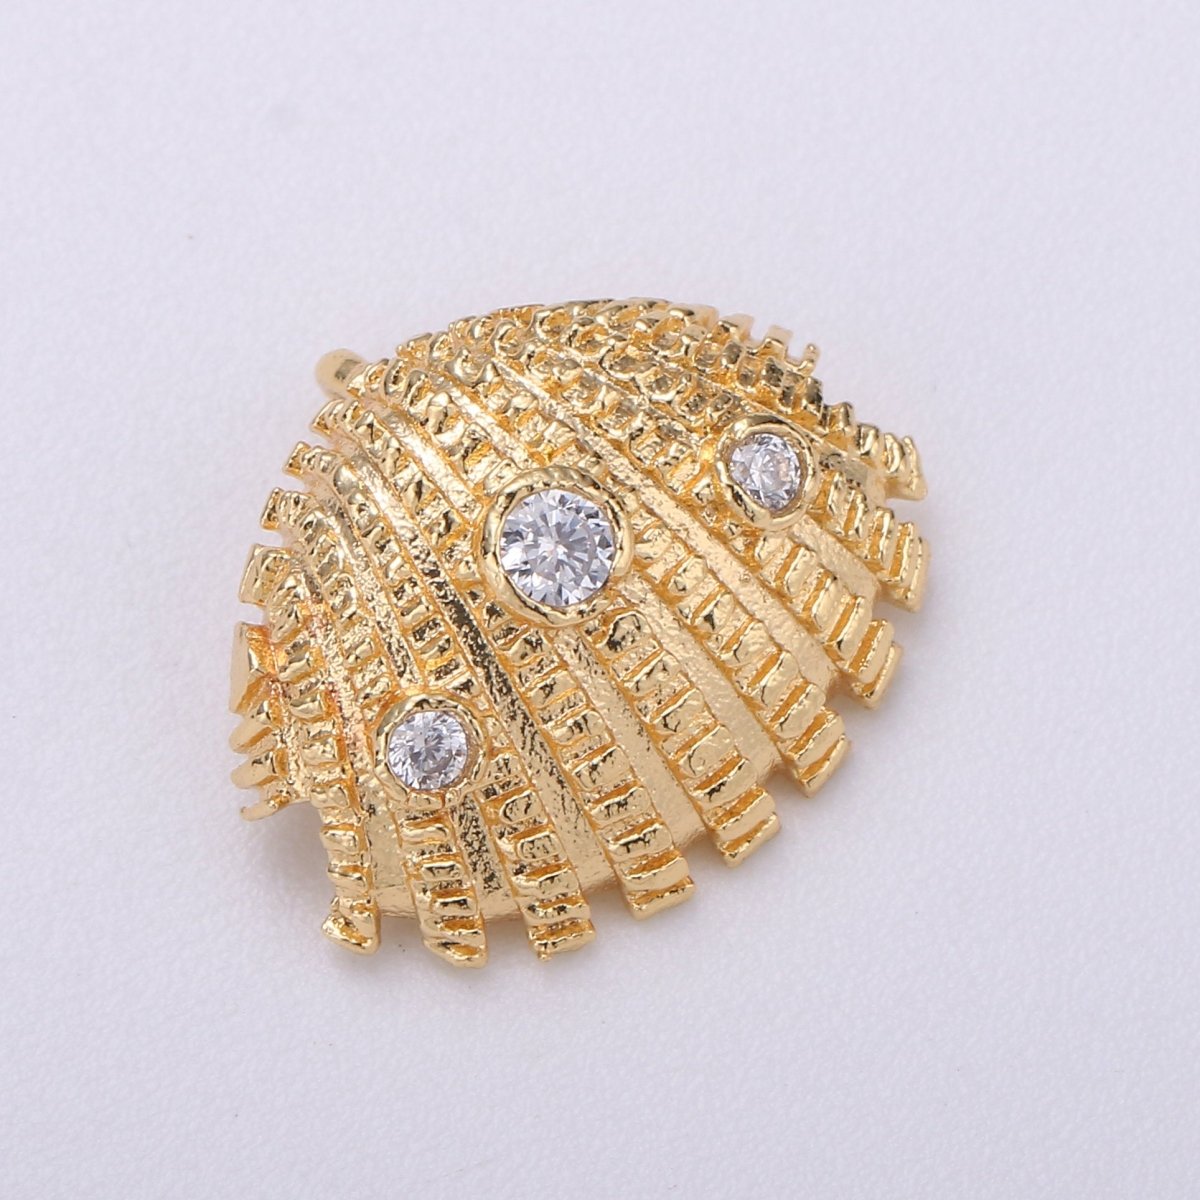 Gold Scallop Shell Charm Ocean Themed, Scallop Pendant, Sea Shell, Nautical Pendant, 14K Gold Filled Shell with CZ Micro Pave Charm CL-C-430 - DLUXCA